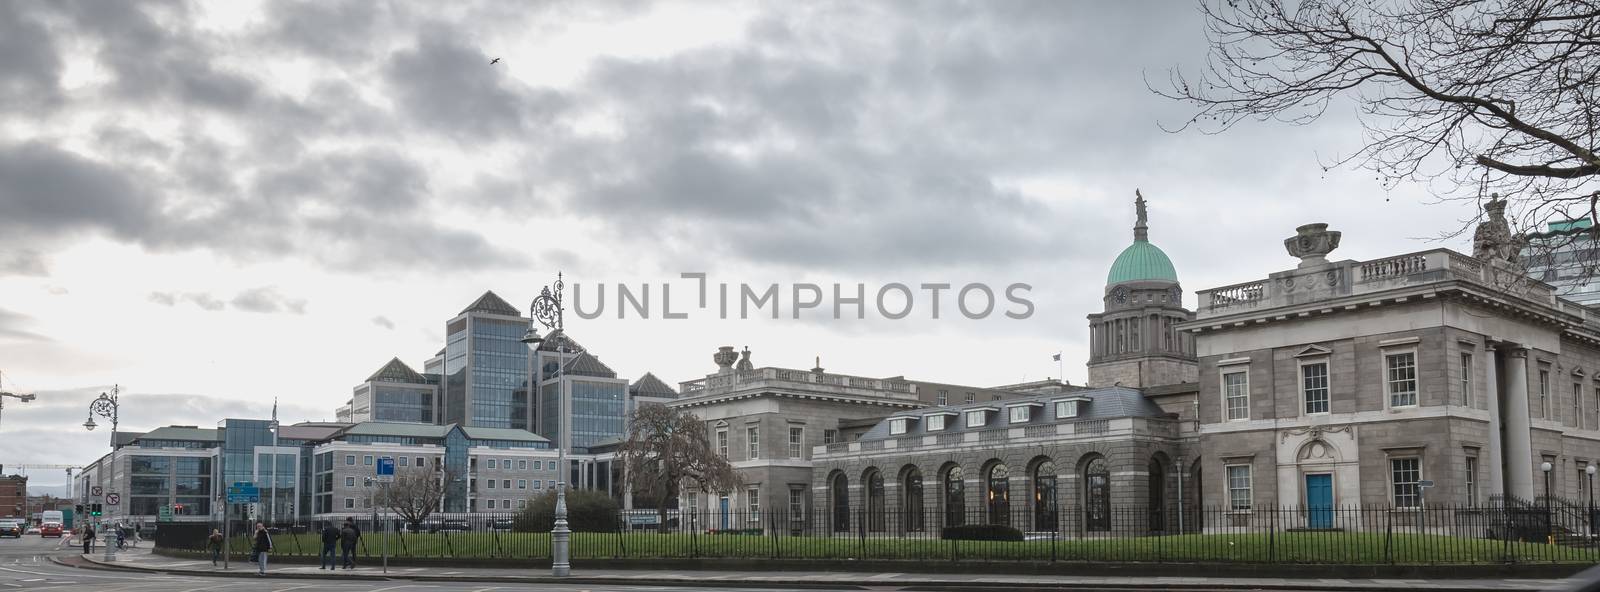 Dublin, Ireland - February 12, 2019: Architectural detail of The Custom House which houses the Department of Housing, Planning and Local Government, Department of Culture, Heritage, and the Gaeltacht